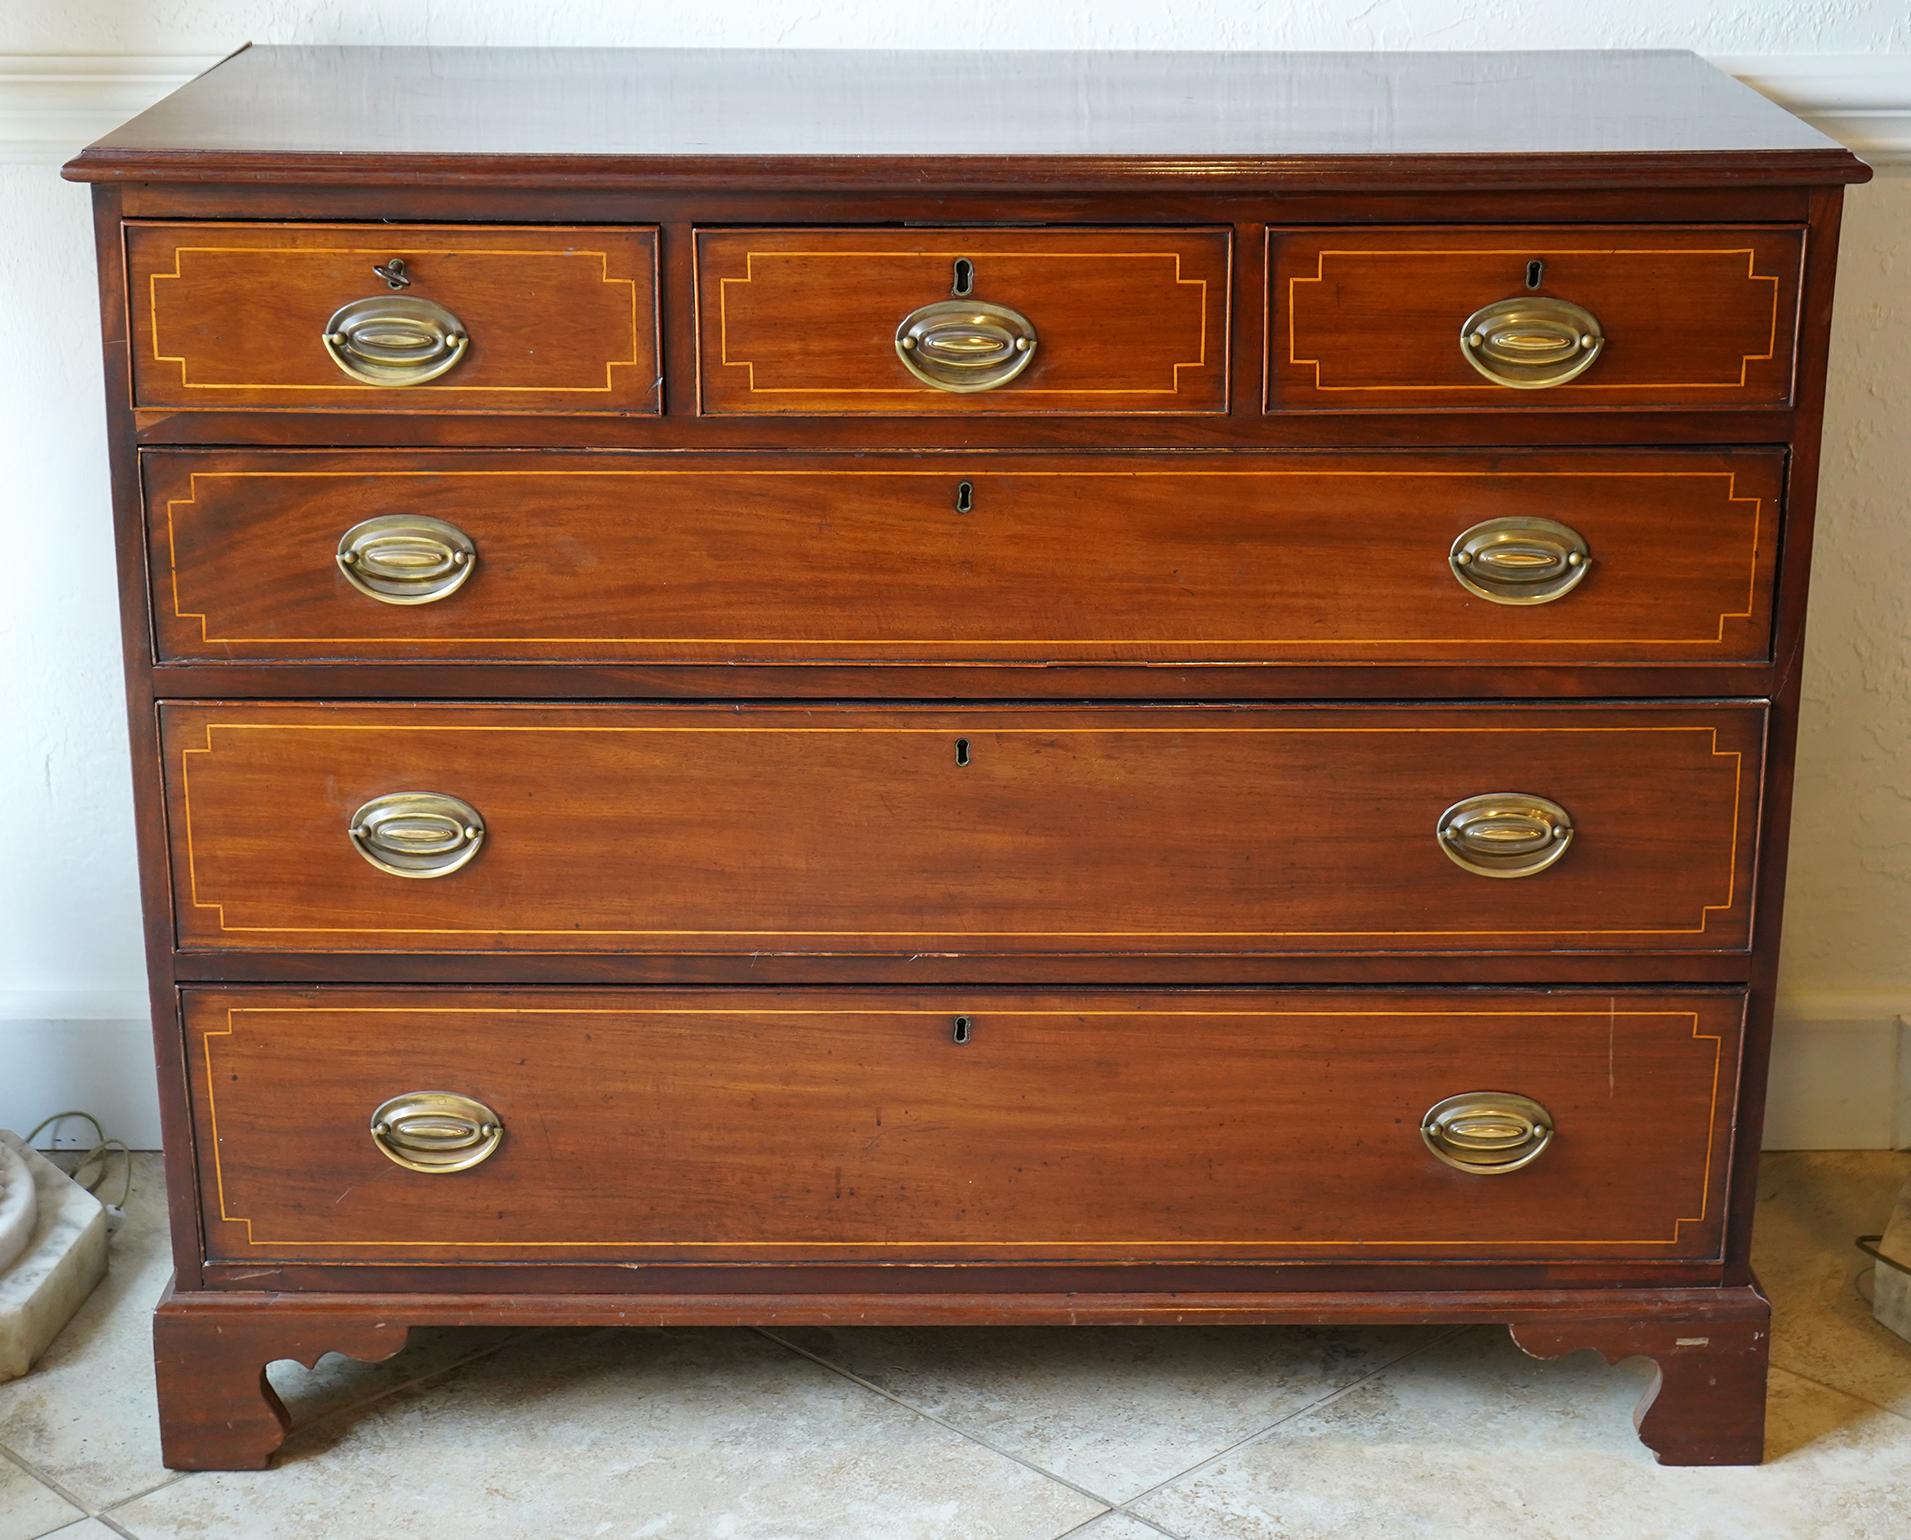 This distinguished George III mahogany chest of drawers dating to around 1820 features three short drawers above three graduated long drawers. All drawers with satinwood string inlay. The chest rests on carved bracket feet.